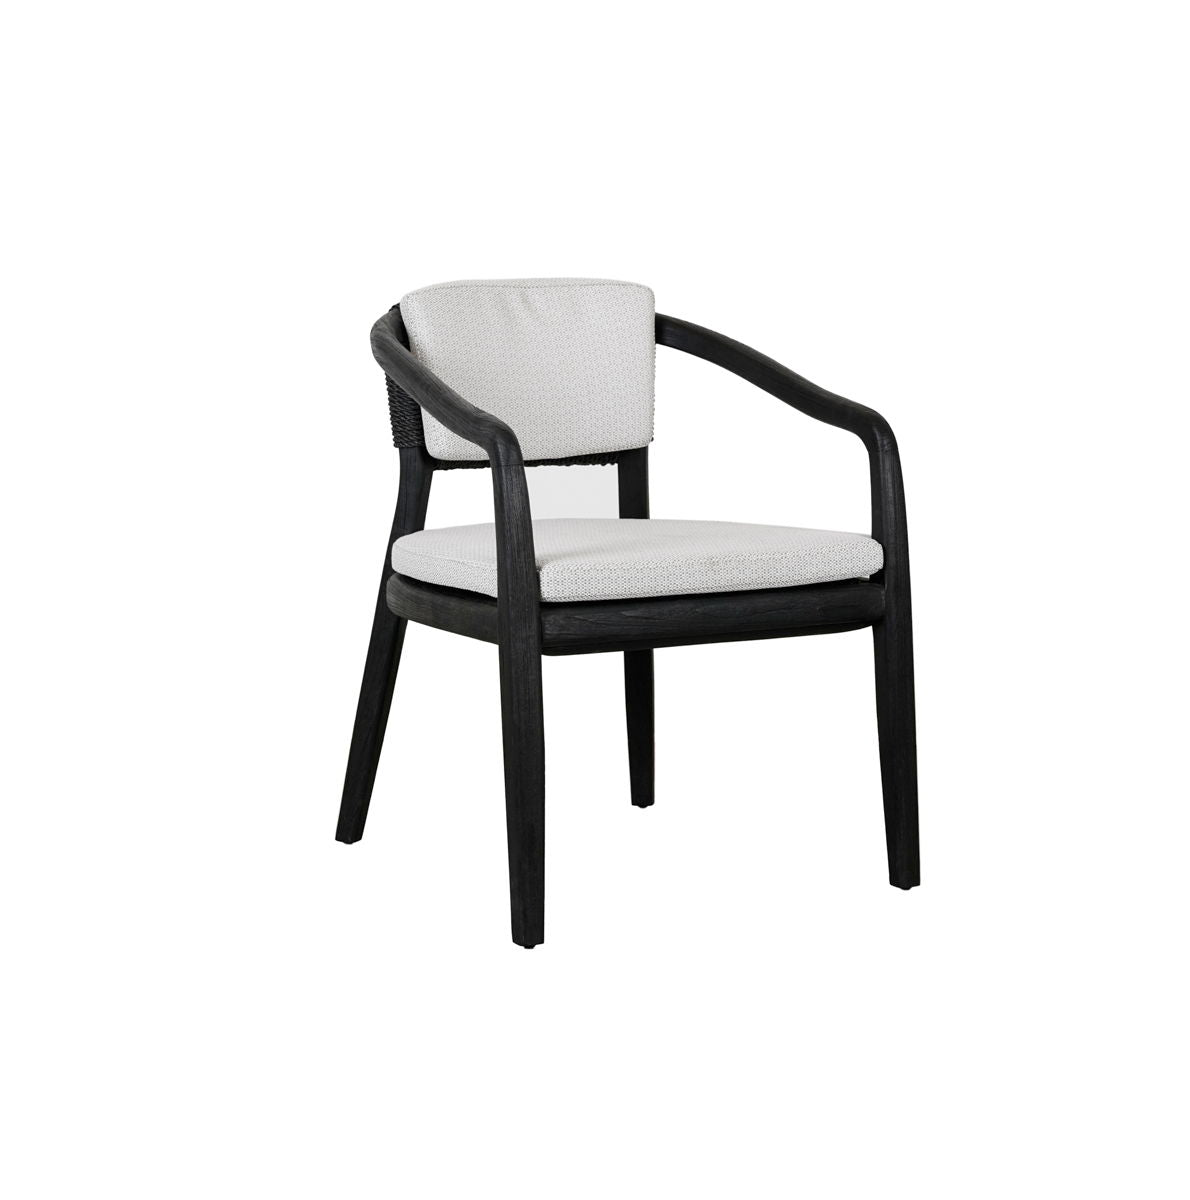 Dawn - Outdoor Dining Chair